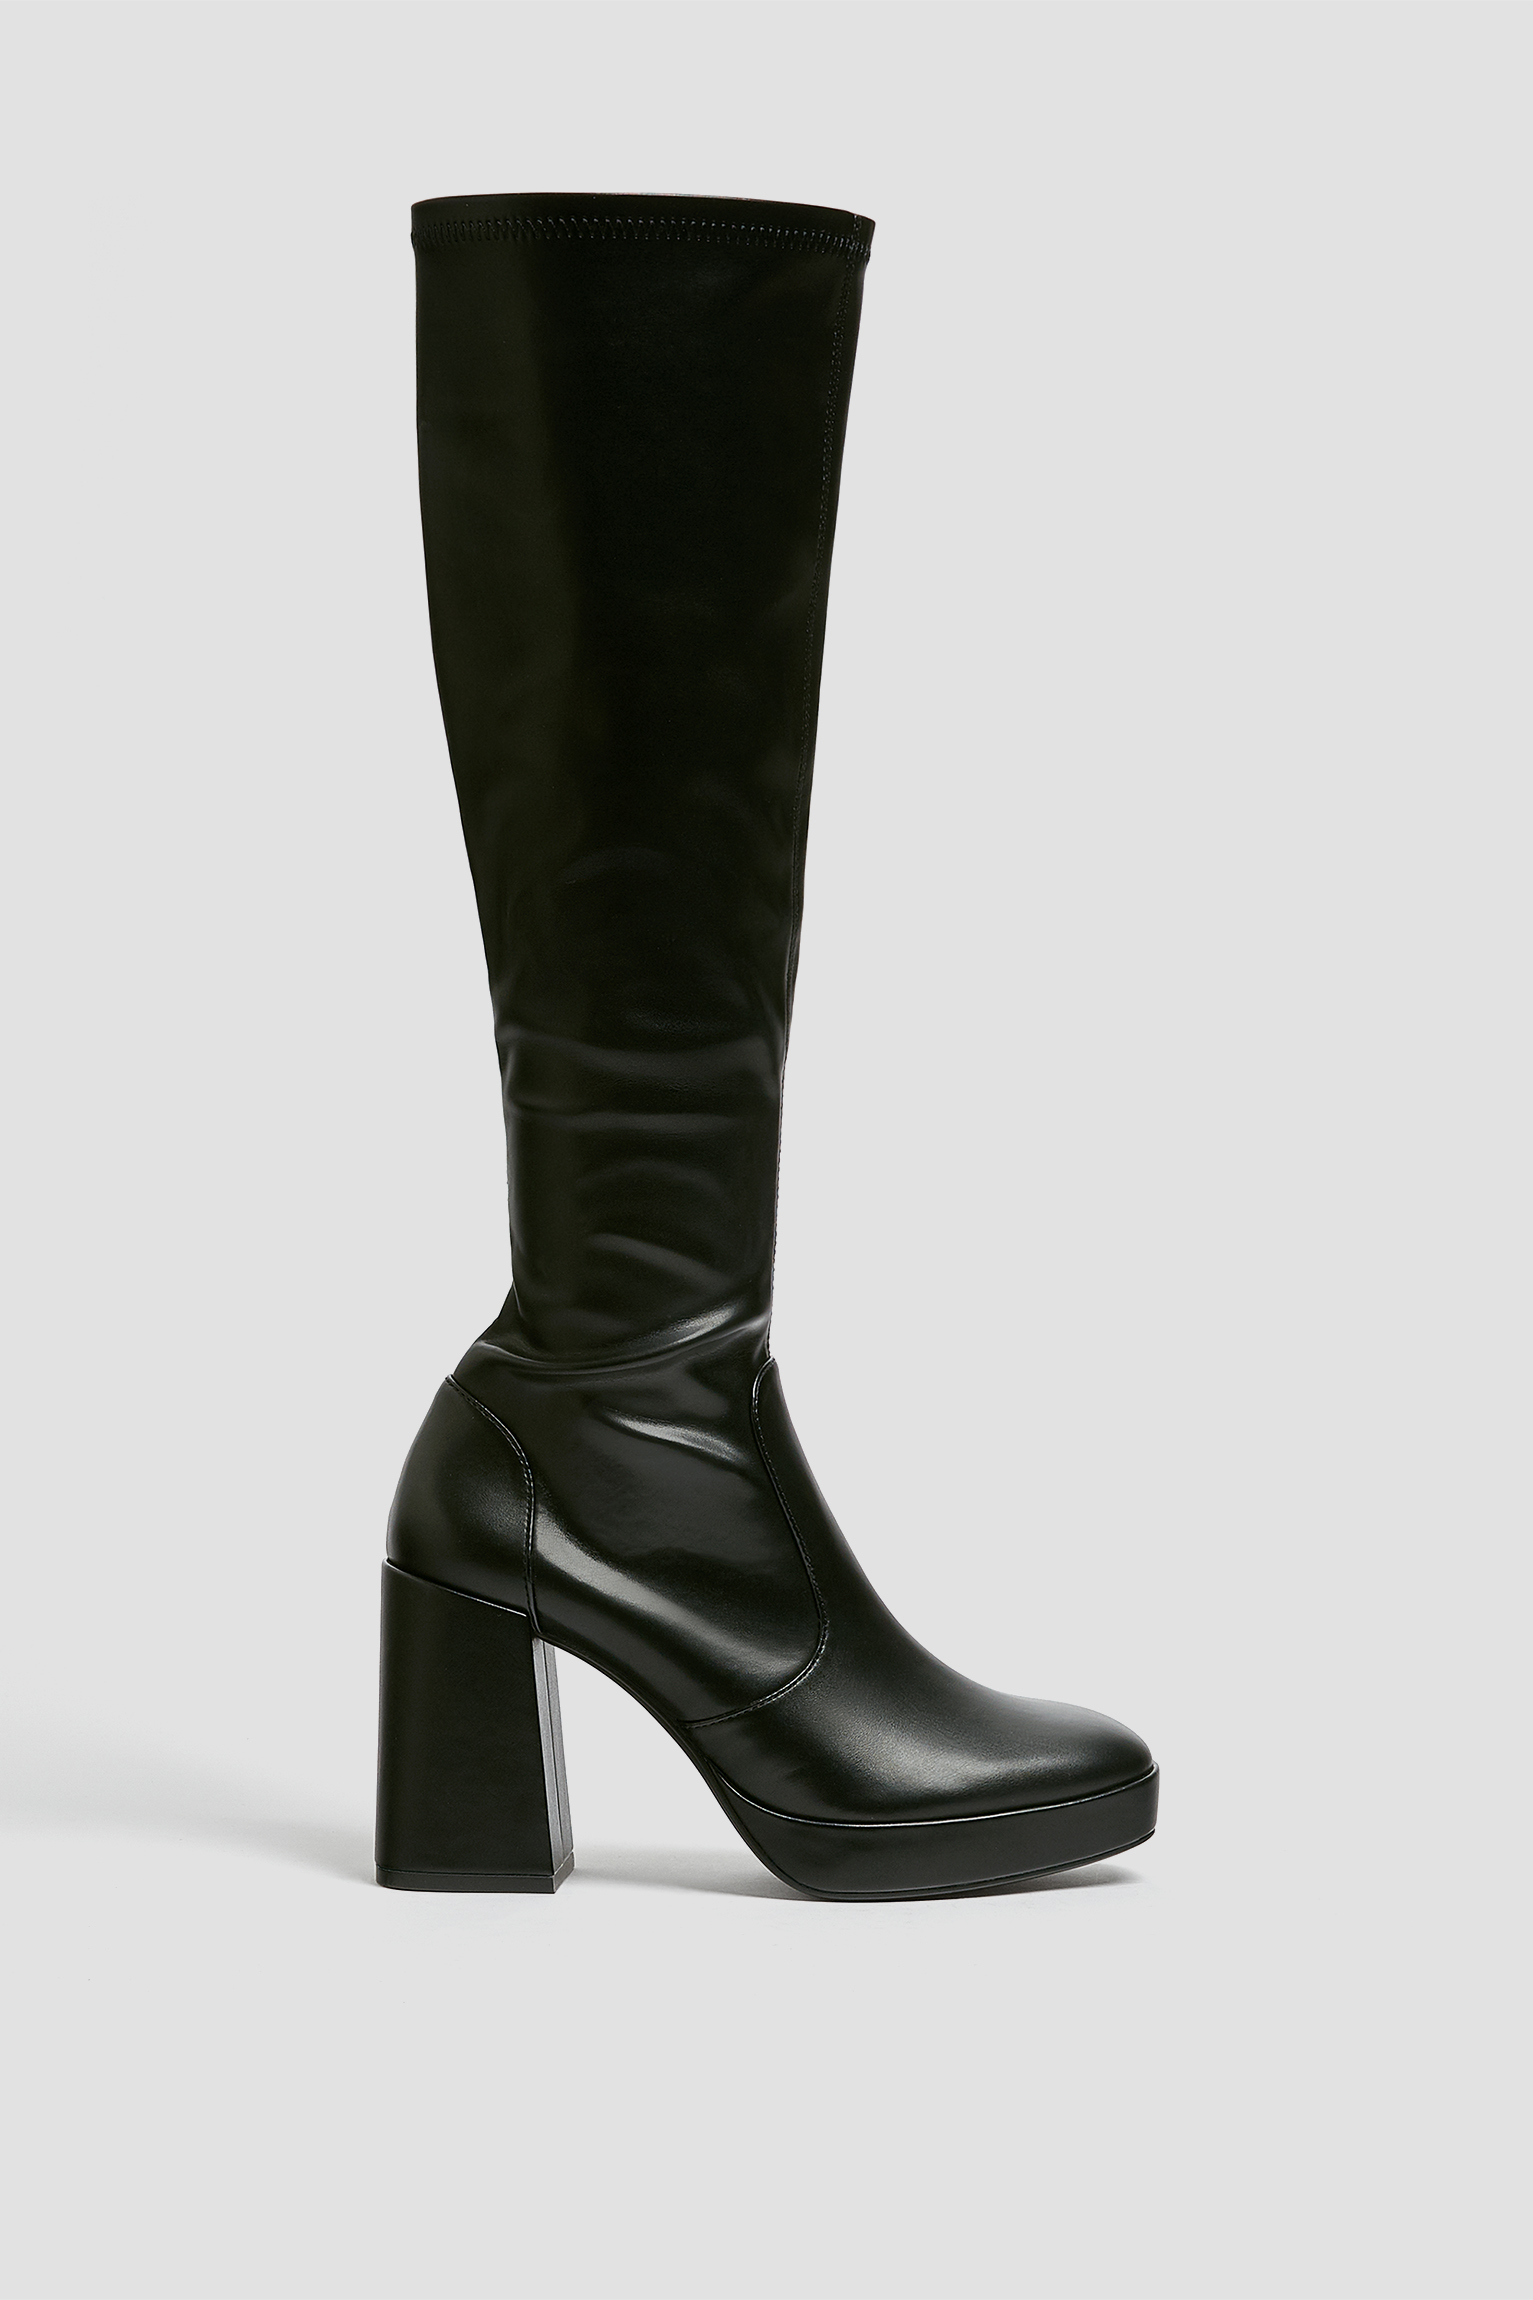 stretch knee high boots